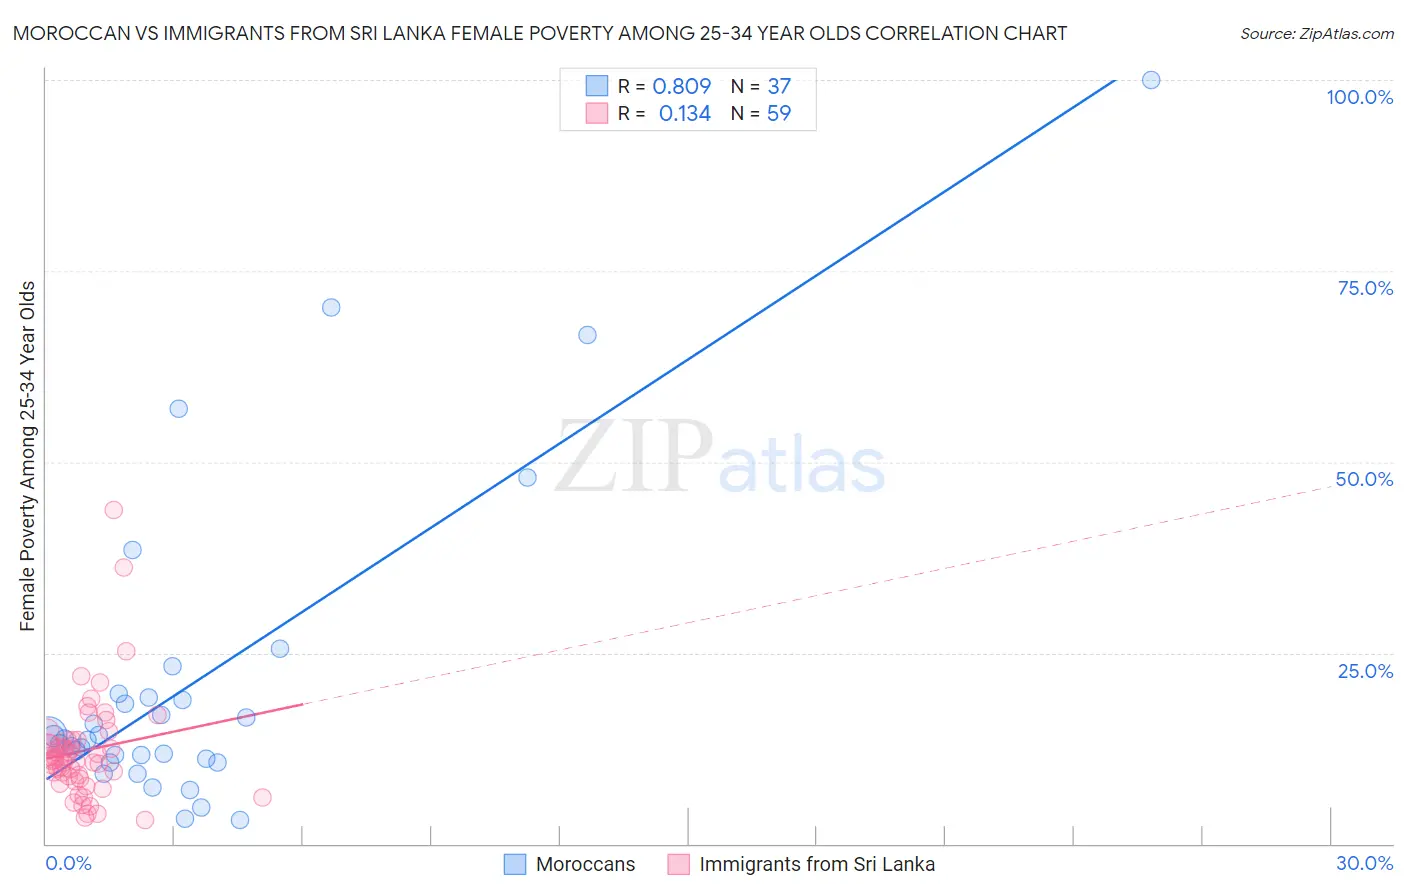 Moroccan vs Immigrants from Sri Lanka Female Poverty Among 25-34 Year Olds